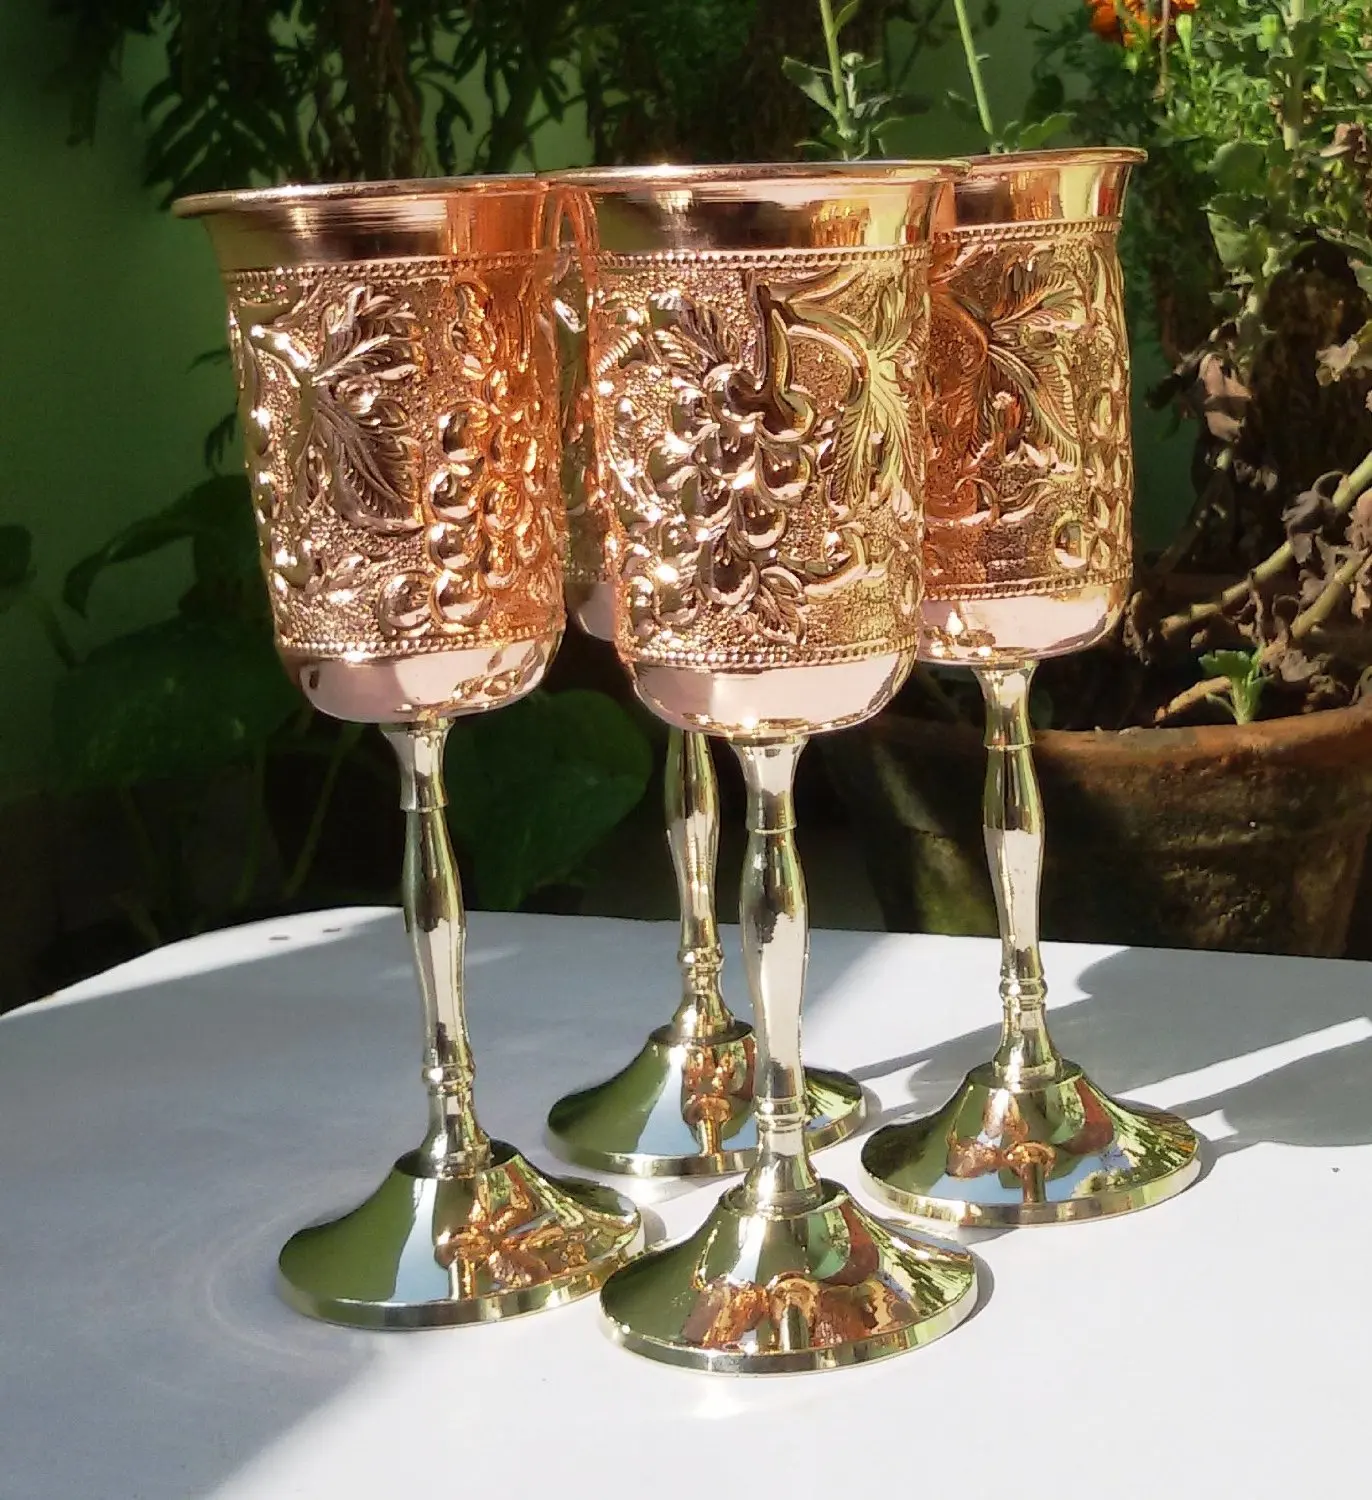 Handmade Pure Copper Wine Goblet Wine Glass Copper Moscow Mule Mint Julep Cup 